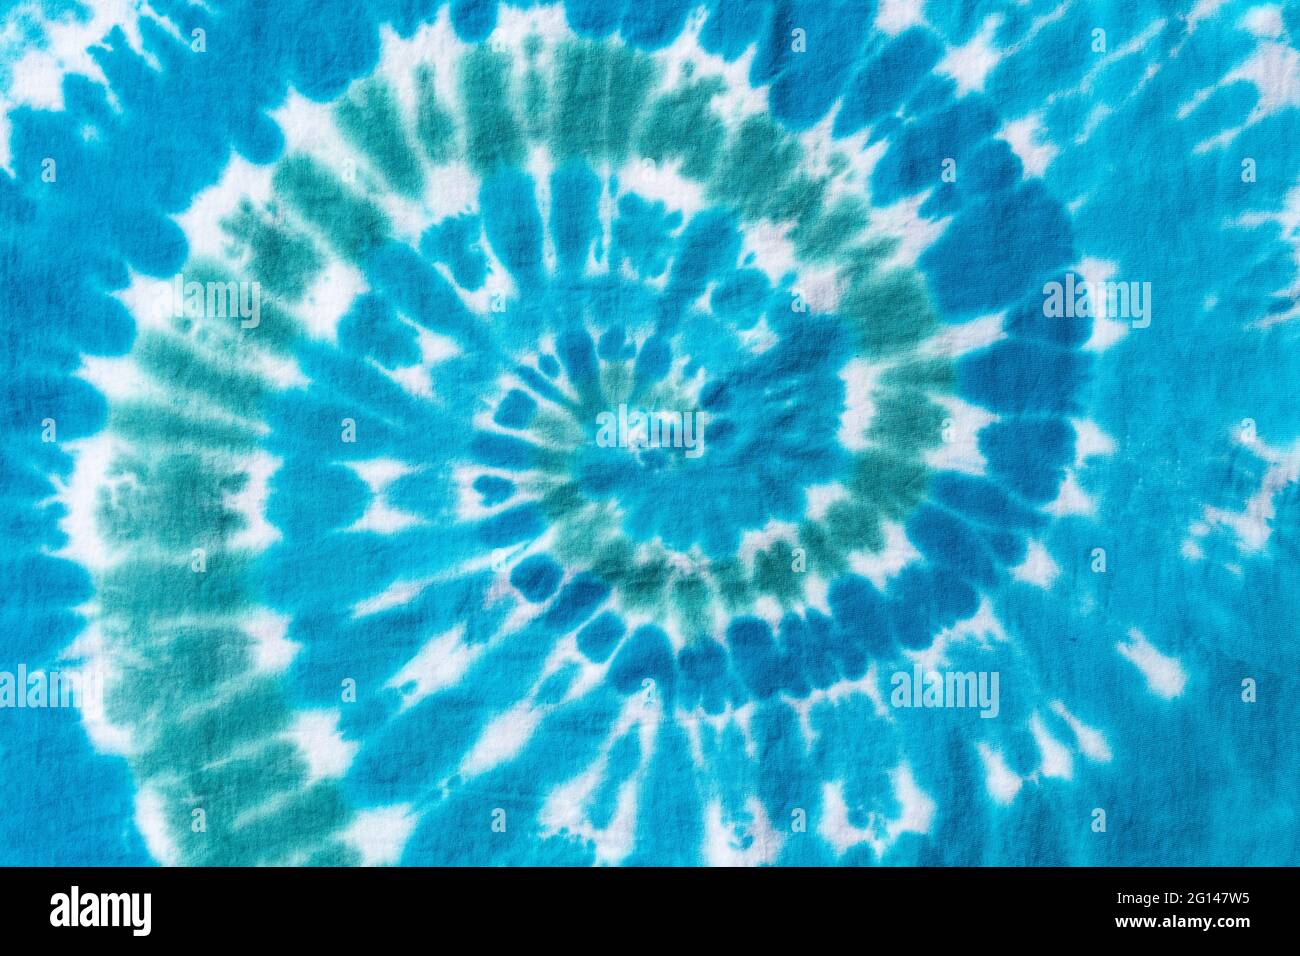 Colorful Hippie Psychedelic Peace Tie Dye Design Stock Photo - Alamy